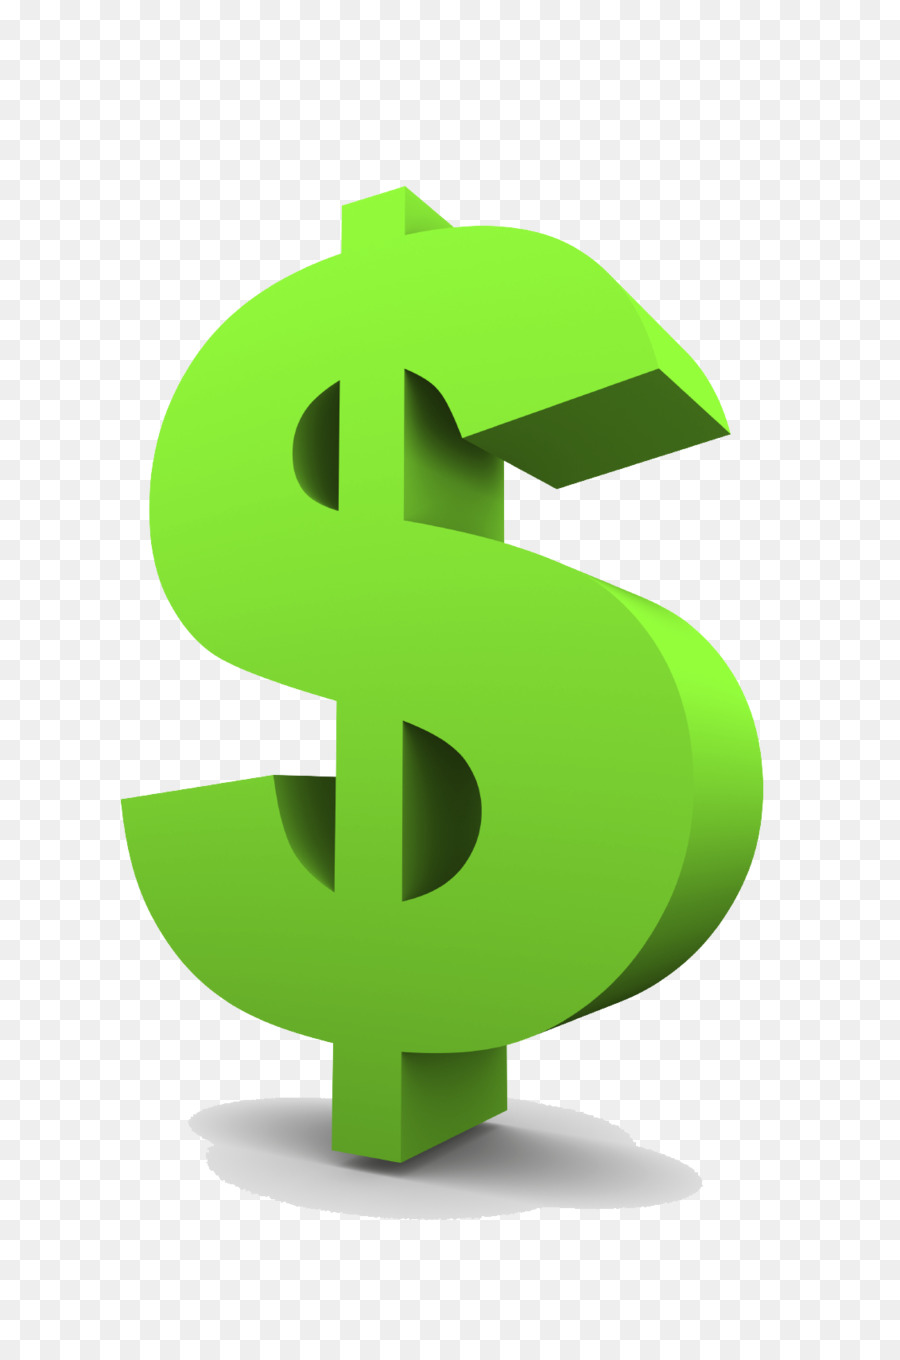 Dollar Sign Clipart Png & Free Dollar Sign Clipart.png.